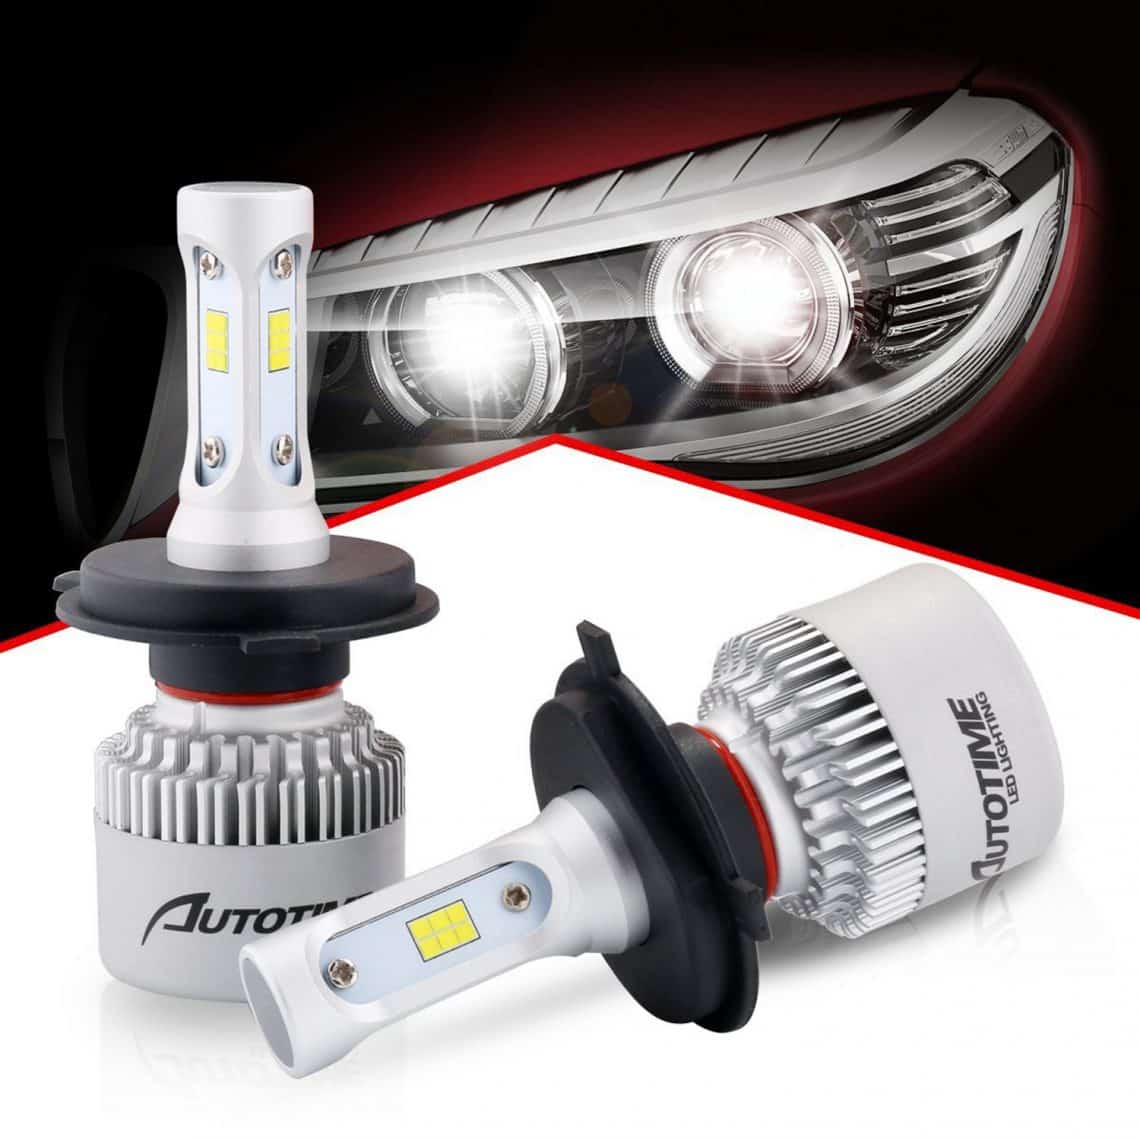 Top 10 Best LED Headlight Bulbs in 2023 Reviews Buyer's Guide